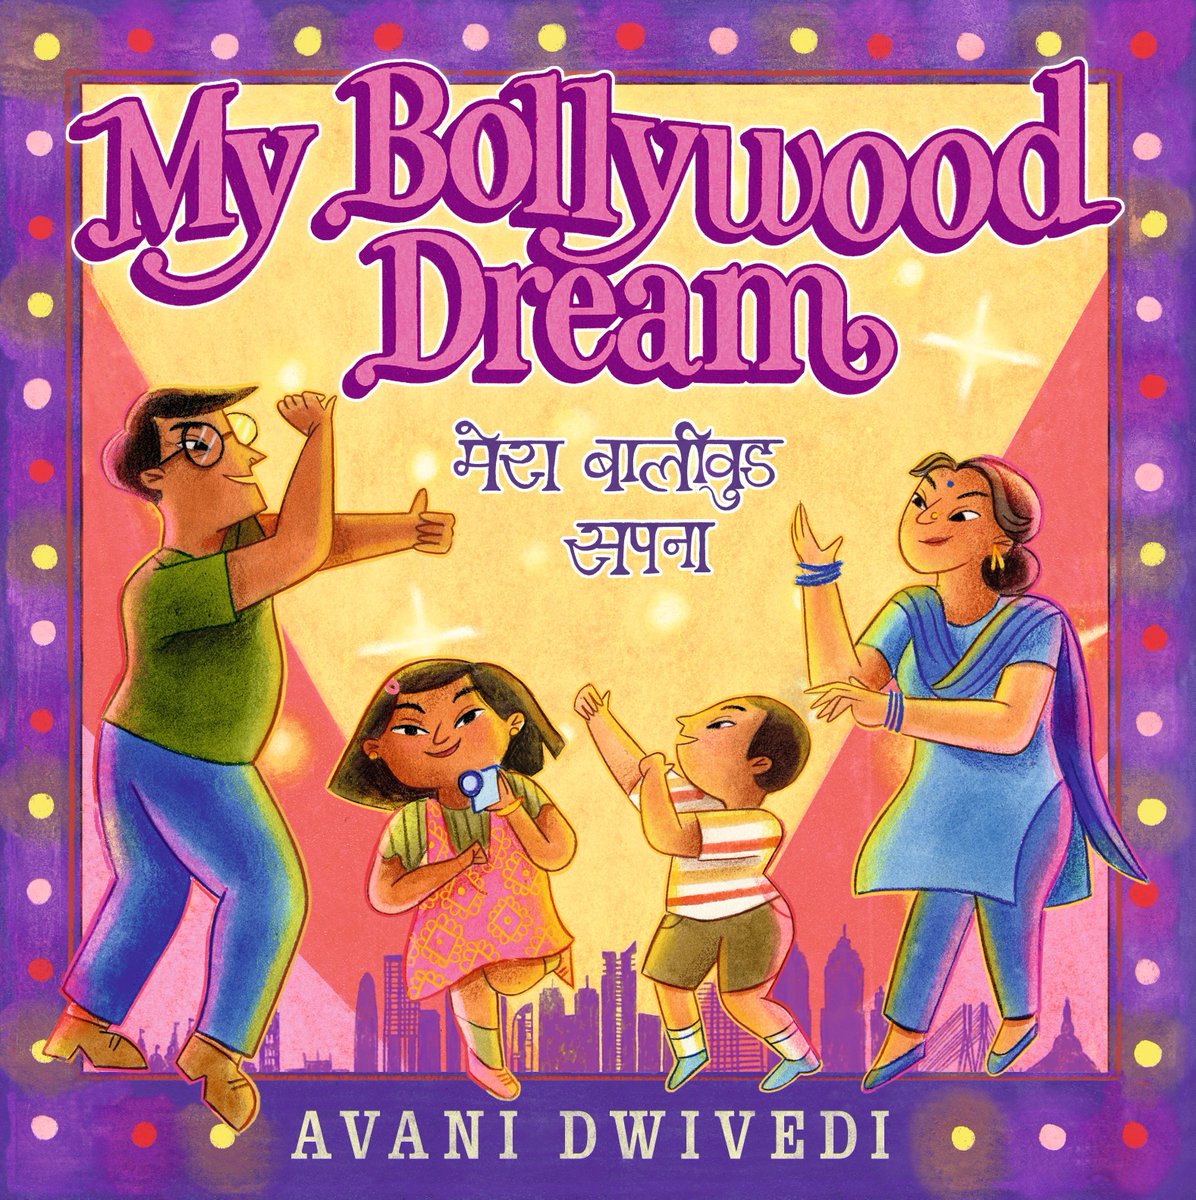 It's #WorldBollywoodDay on Sunday & we have the perfect book by @itisavni to celebrate! My Bollywood Dream brings the spirit of Bollywood to life - The Guardian praised it as 'bold, bright & imaginative [&] conjures the excitement of a Friday family trip to a Mumbai cinema.'